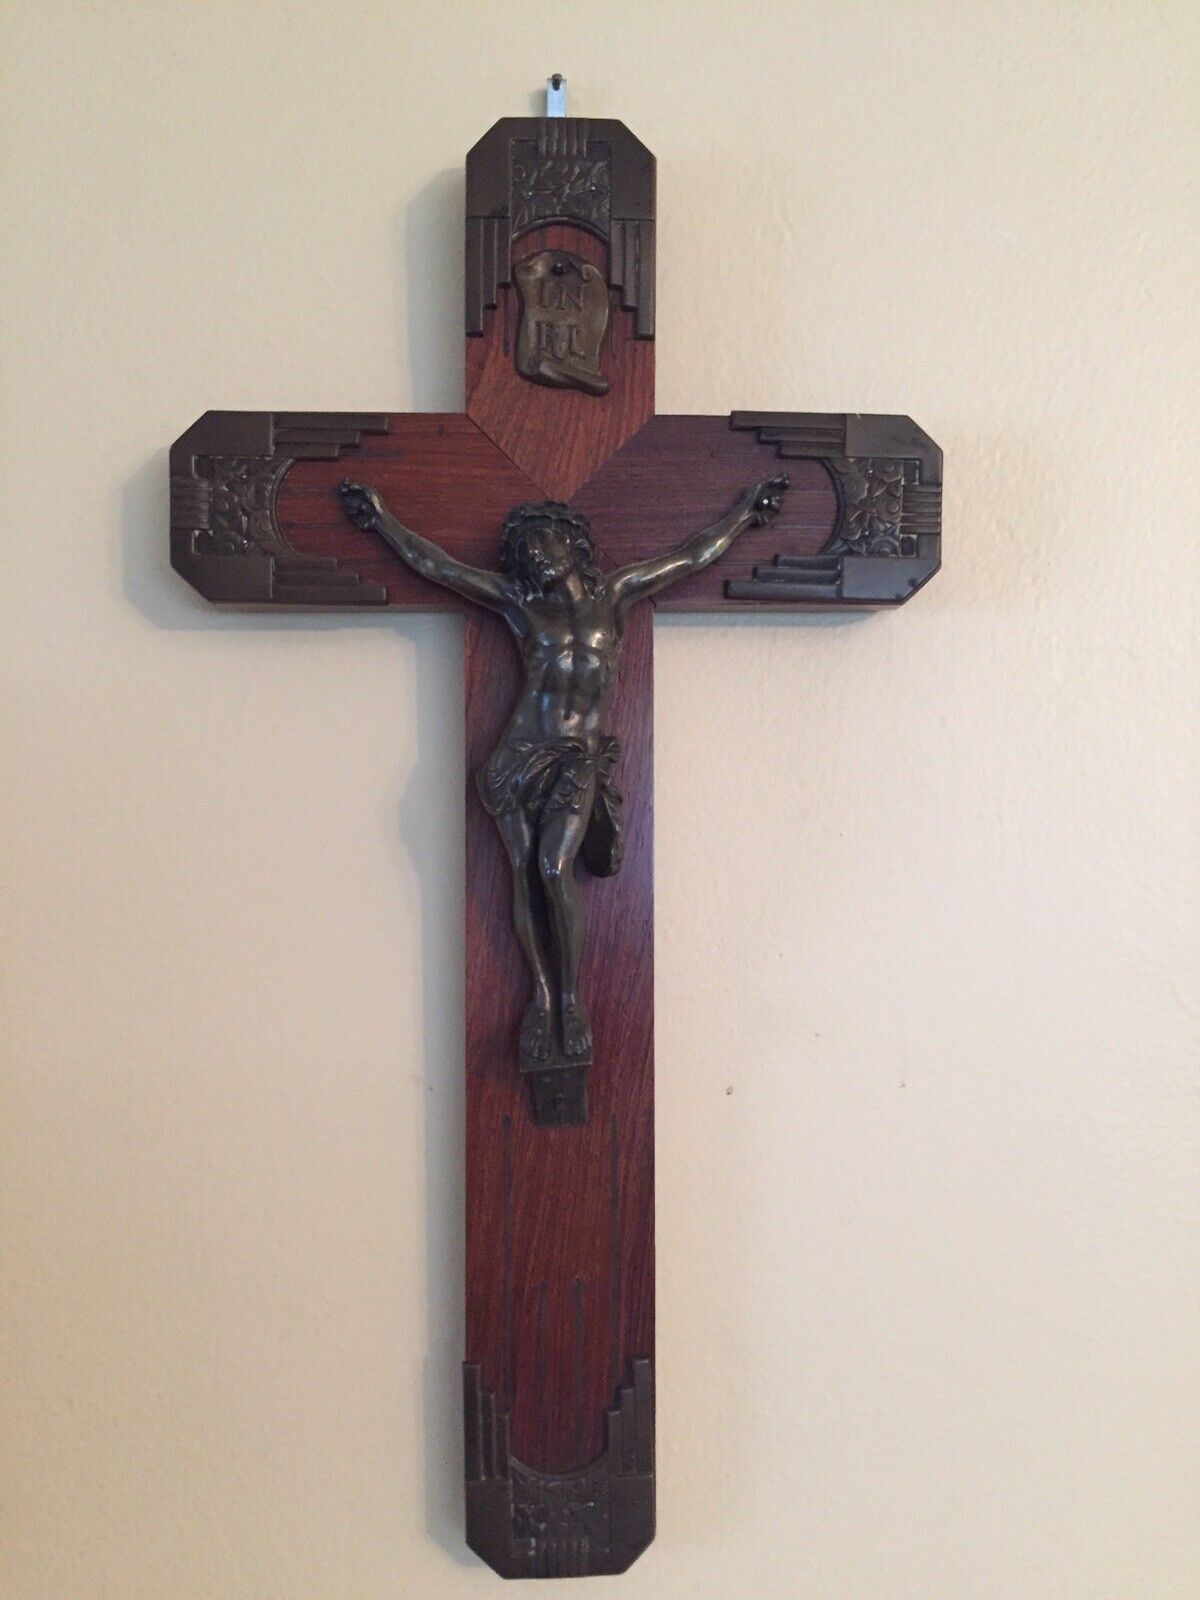 LARGE FRENCH ART DECO CROSS WITH JESUS 14”x7,5”